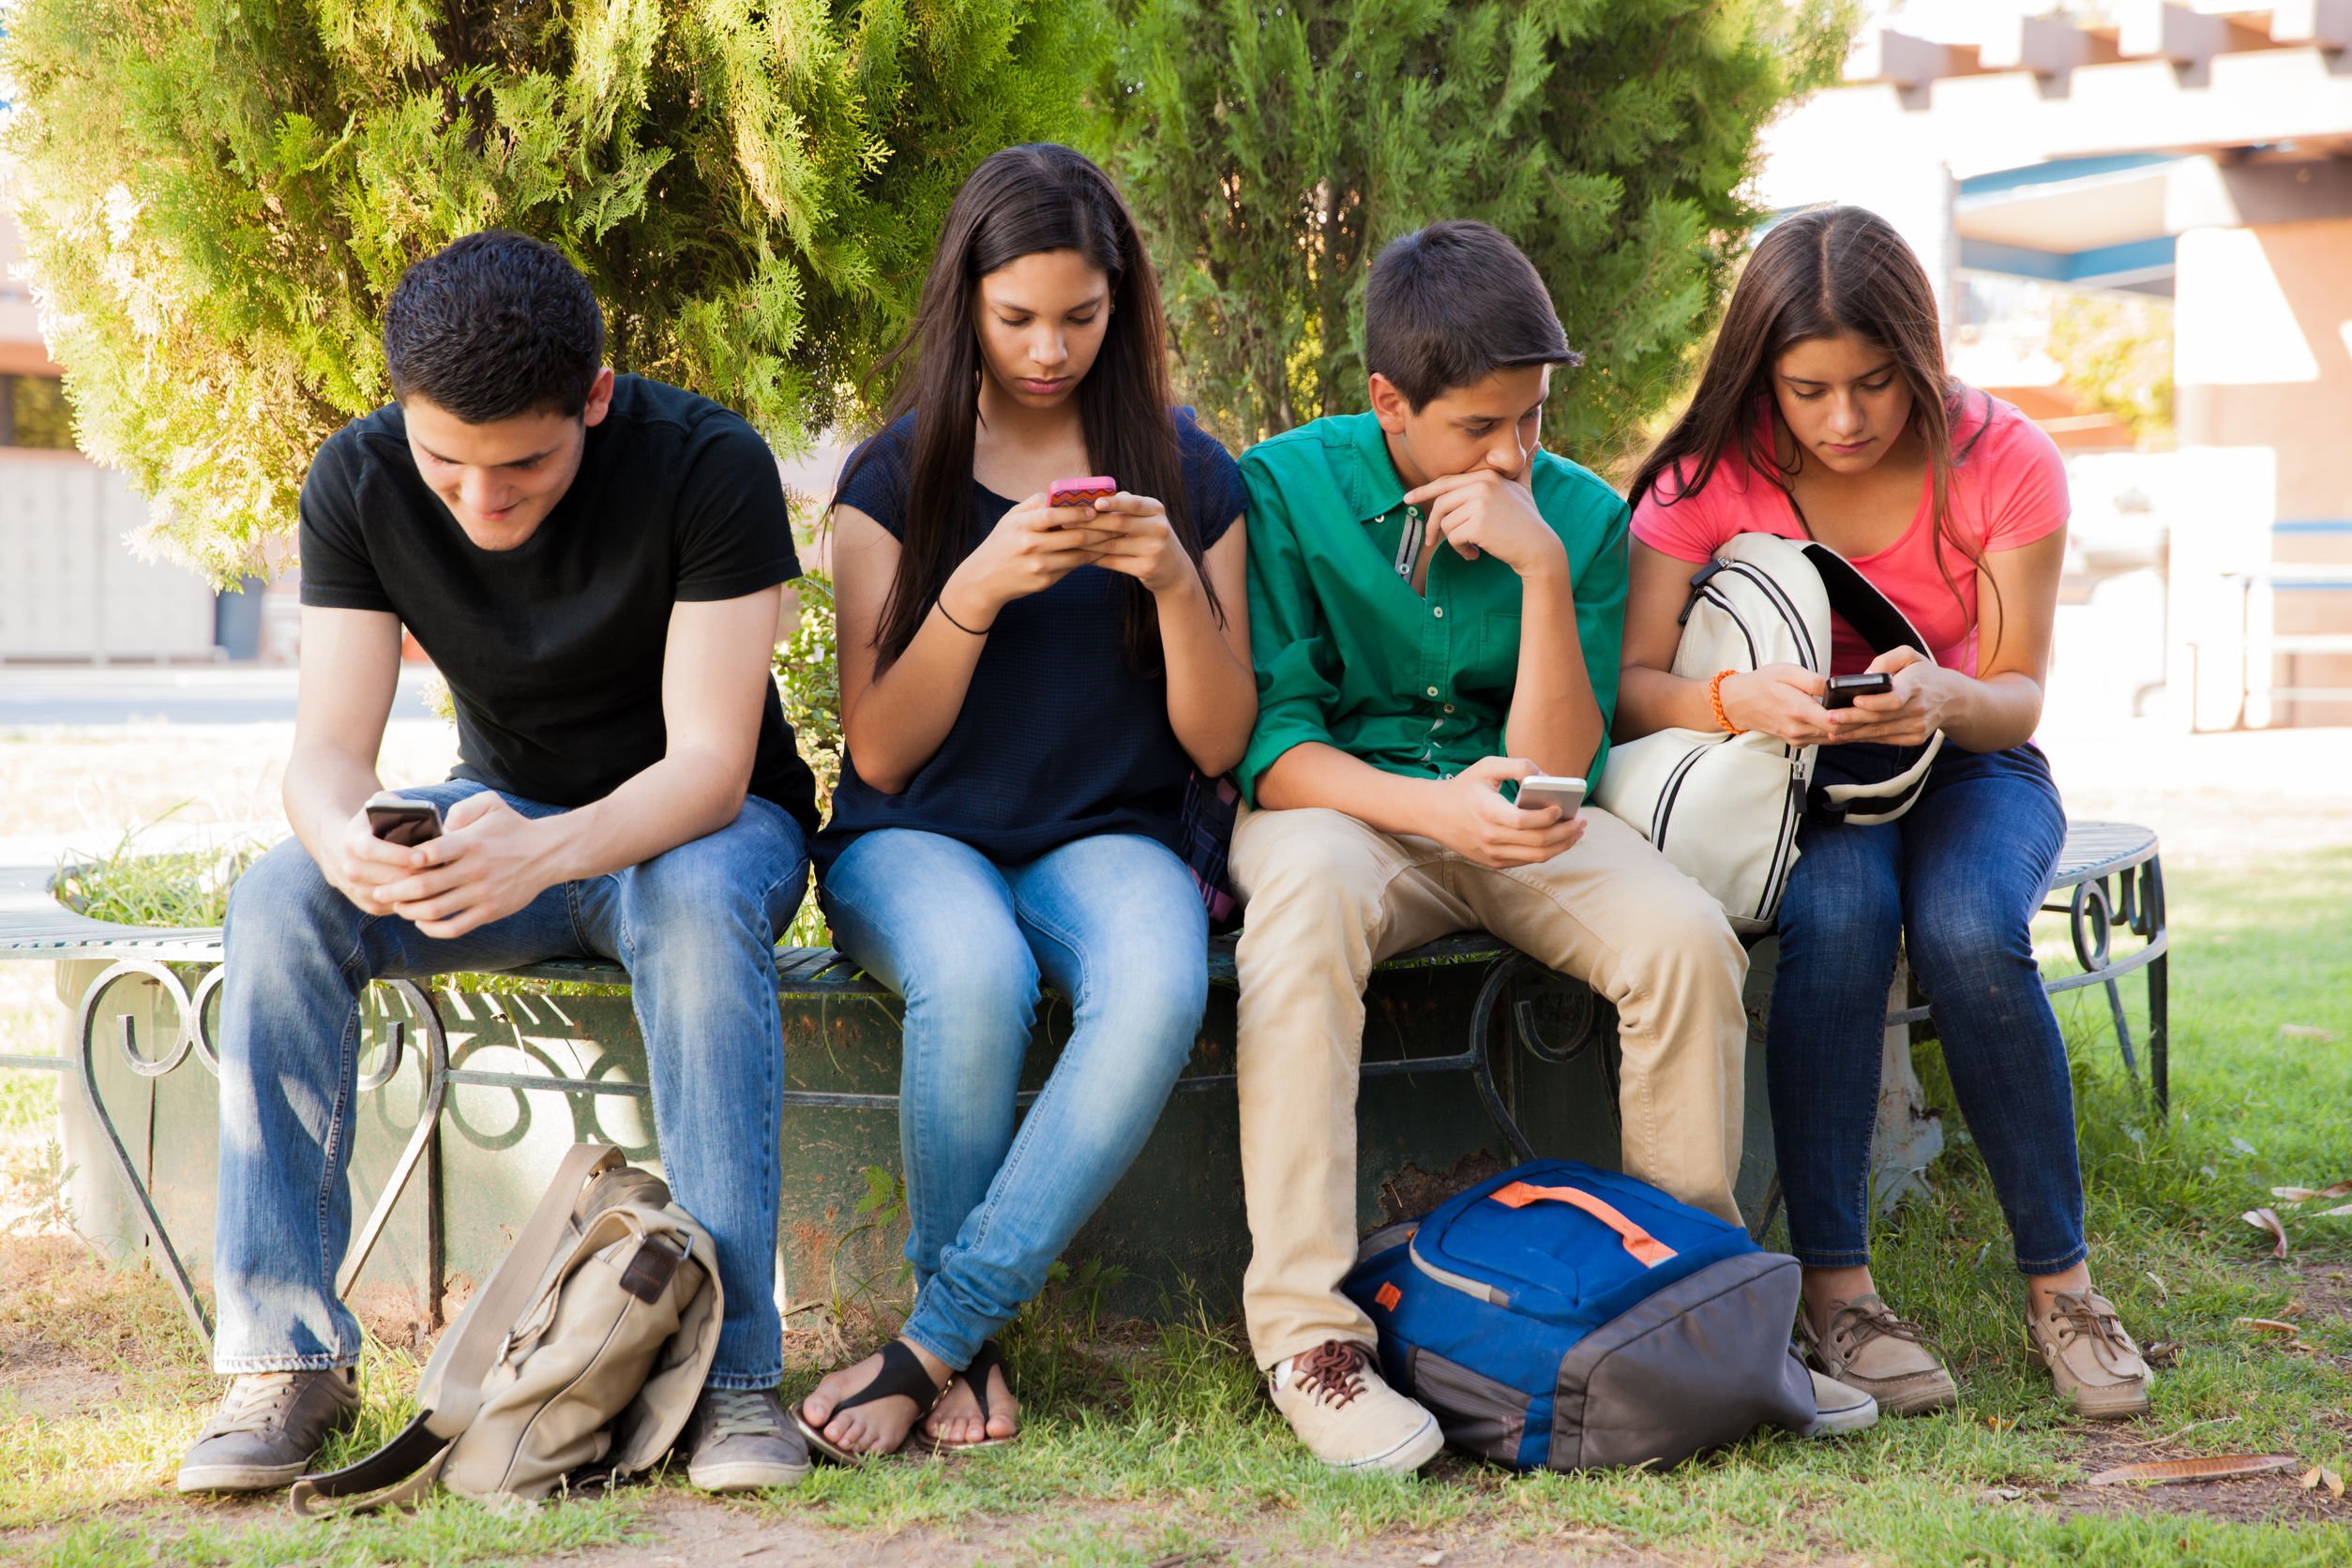 29348172 - group of teenage boys and girls ignoring each other while using their cell phones at school